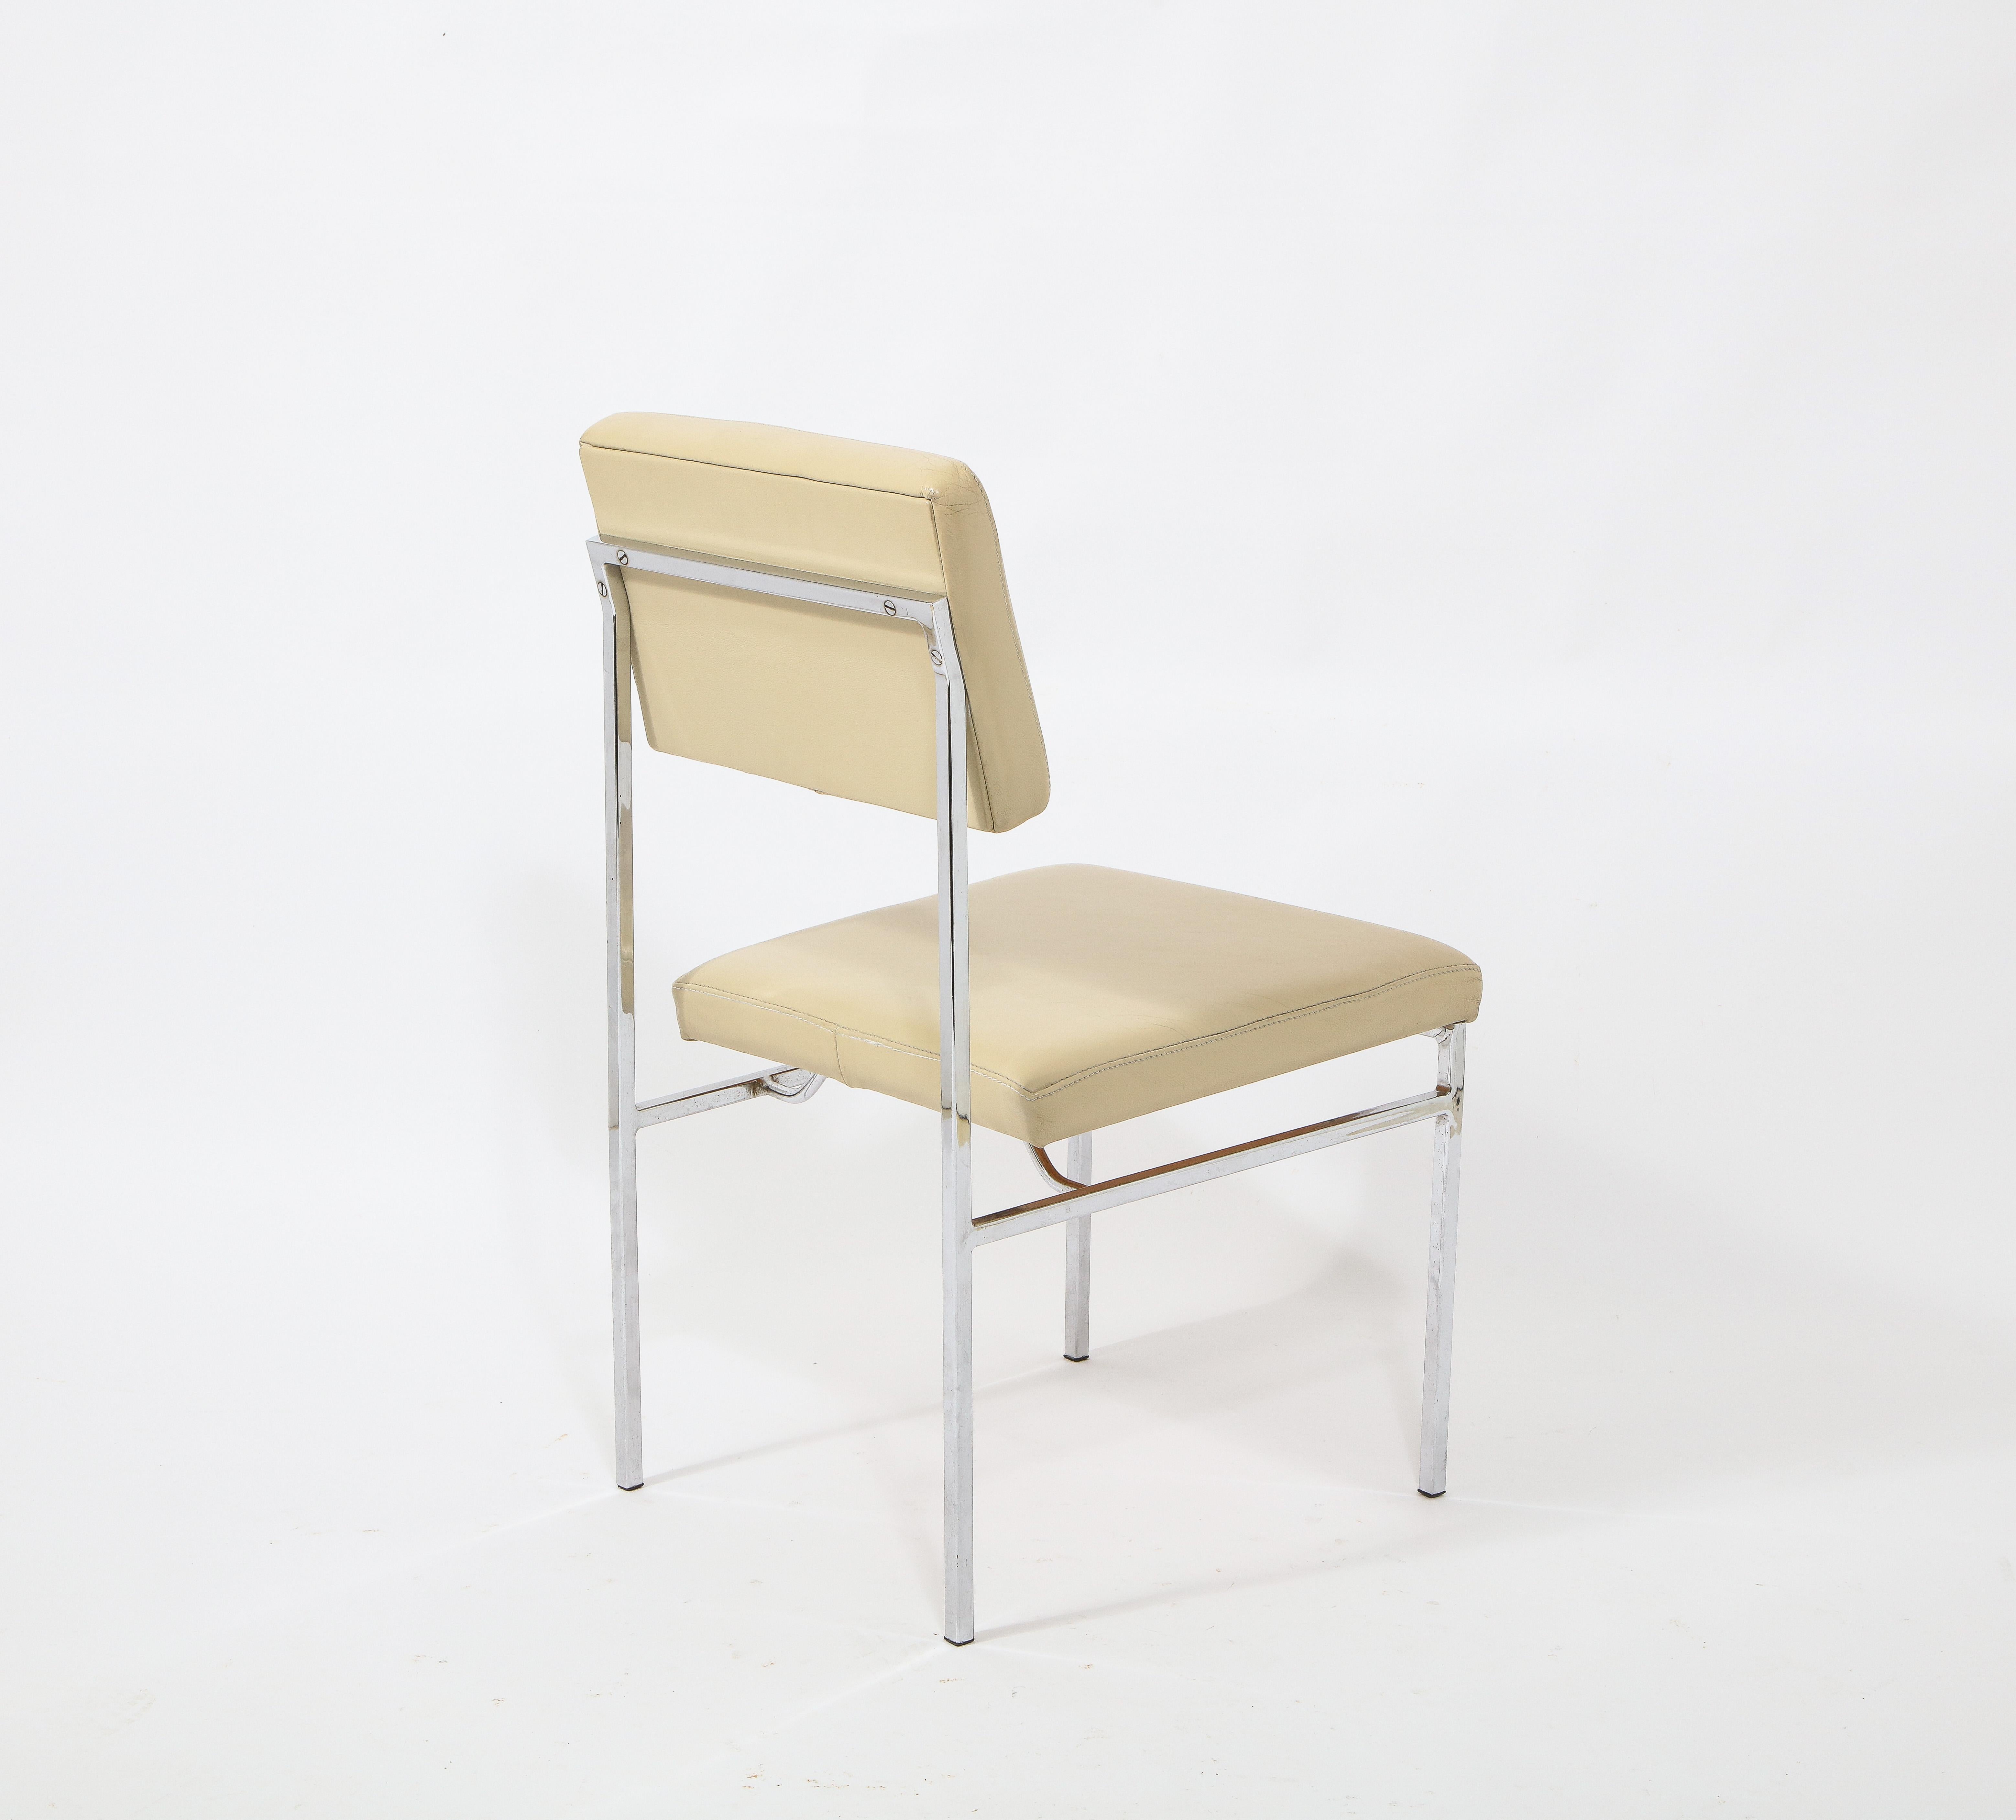 6 Chrome and Cream Leather P60 Chairs by Philippon & Lecoq, France, 1960's For Sale 7